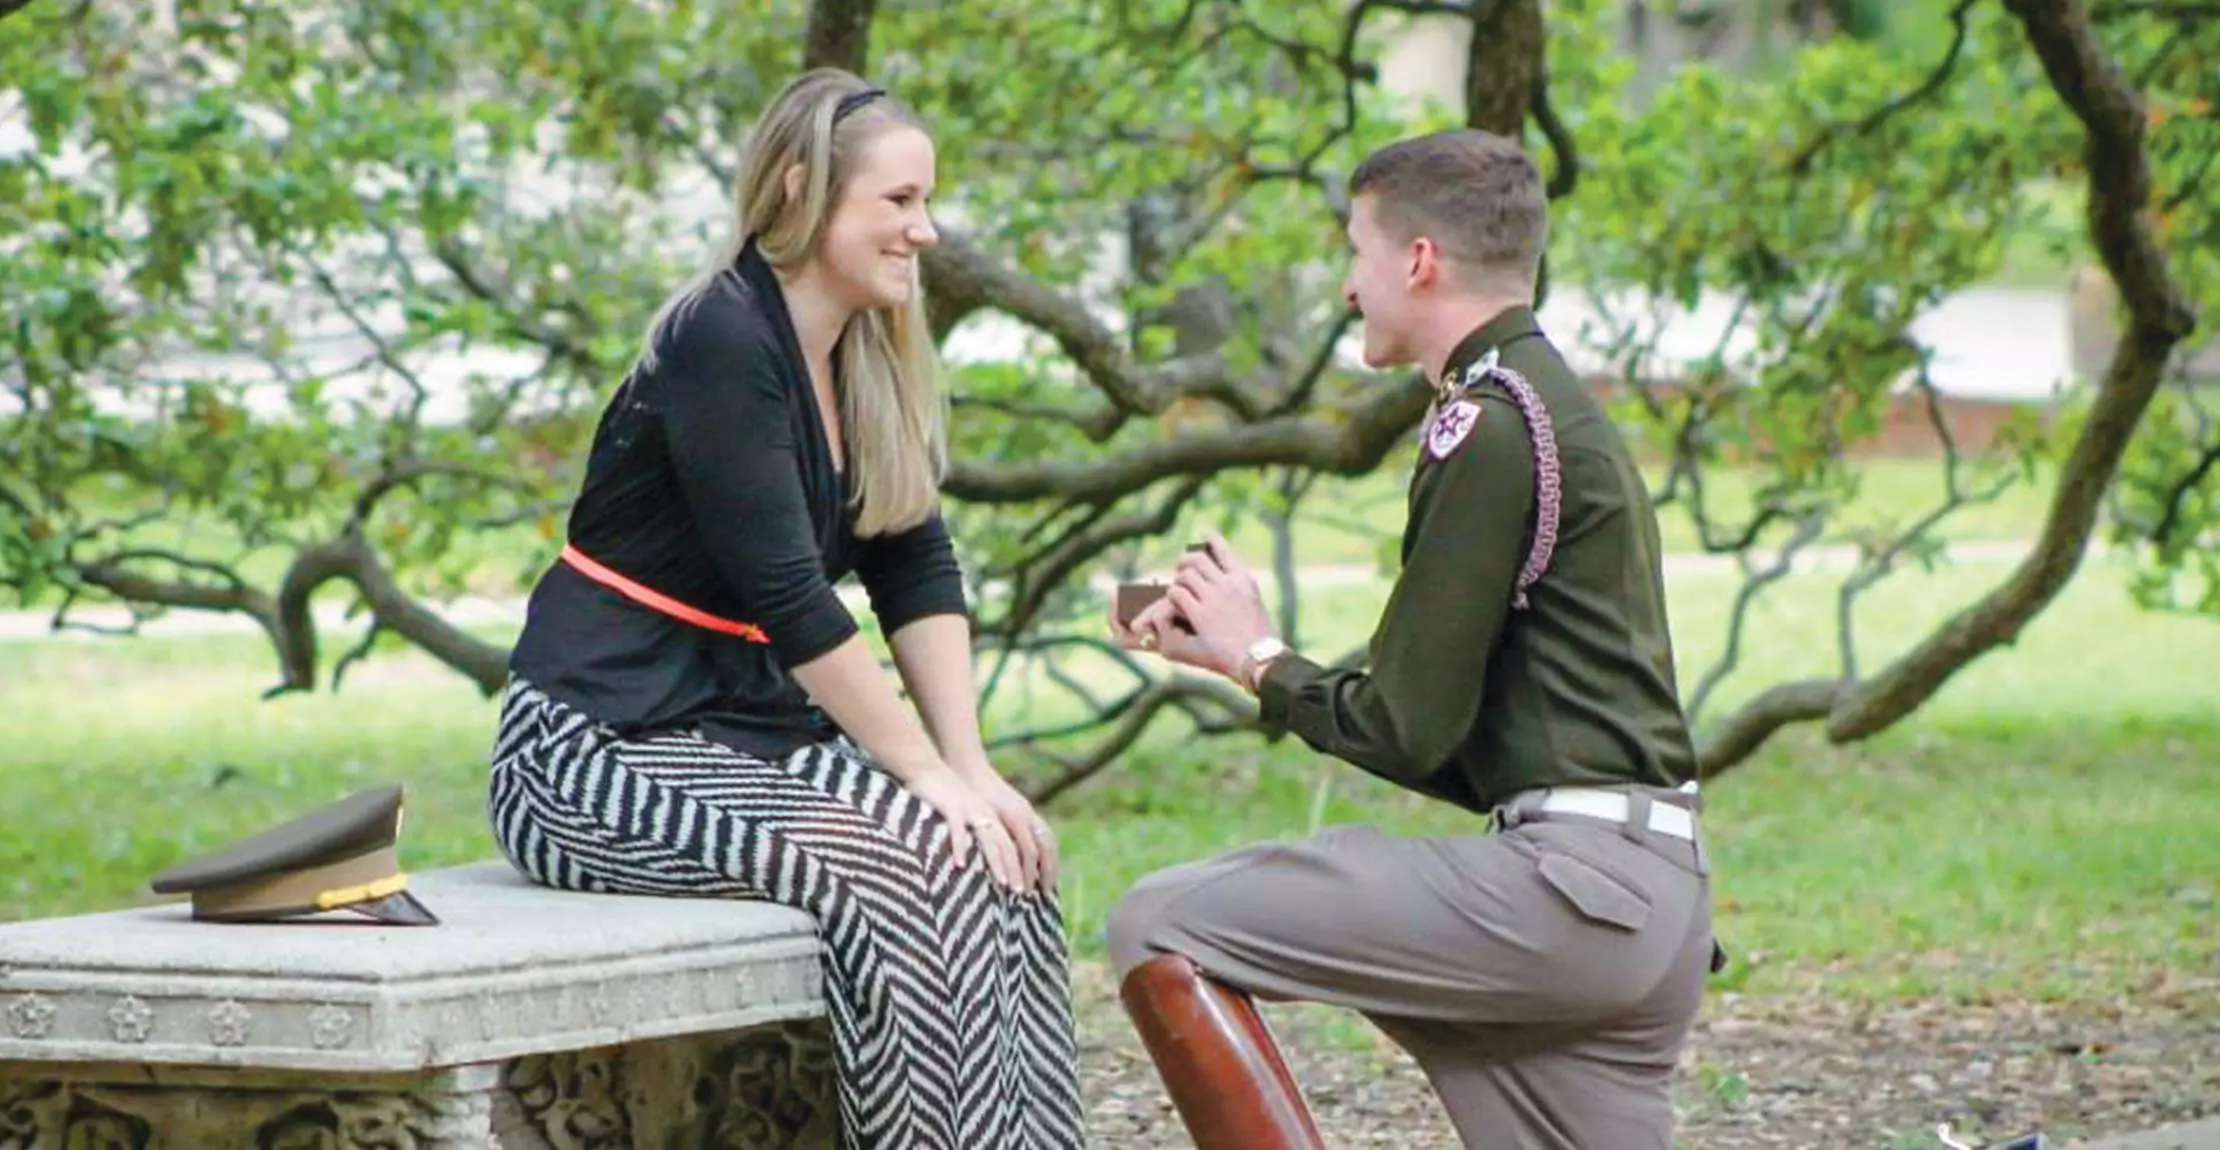 A man proposes to a woman in a park